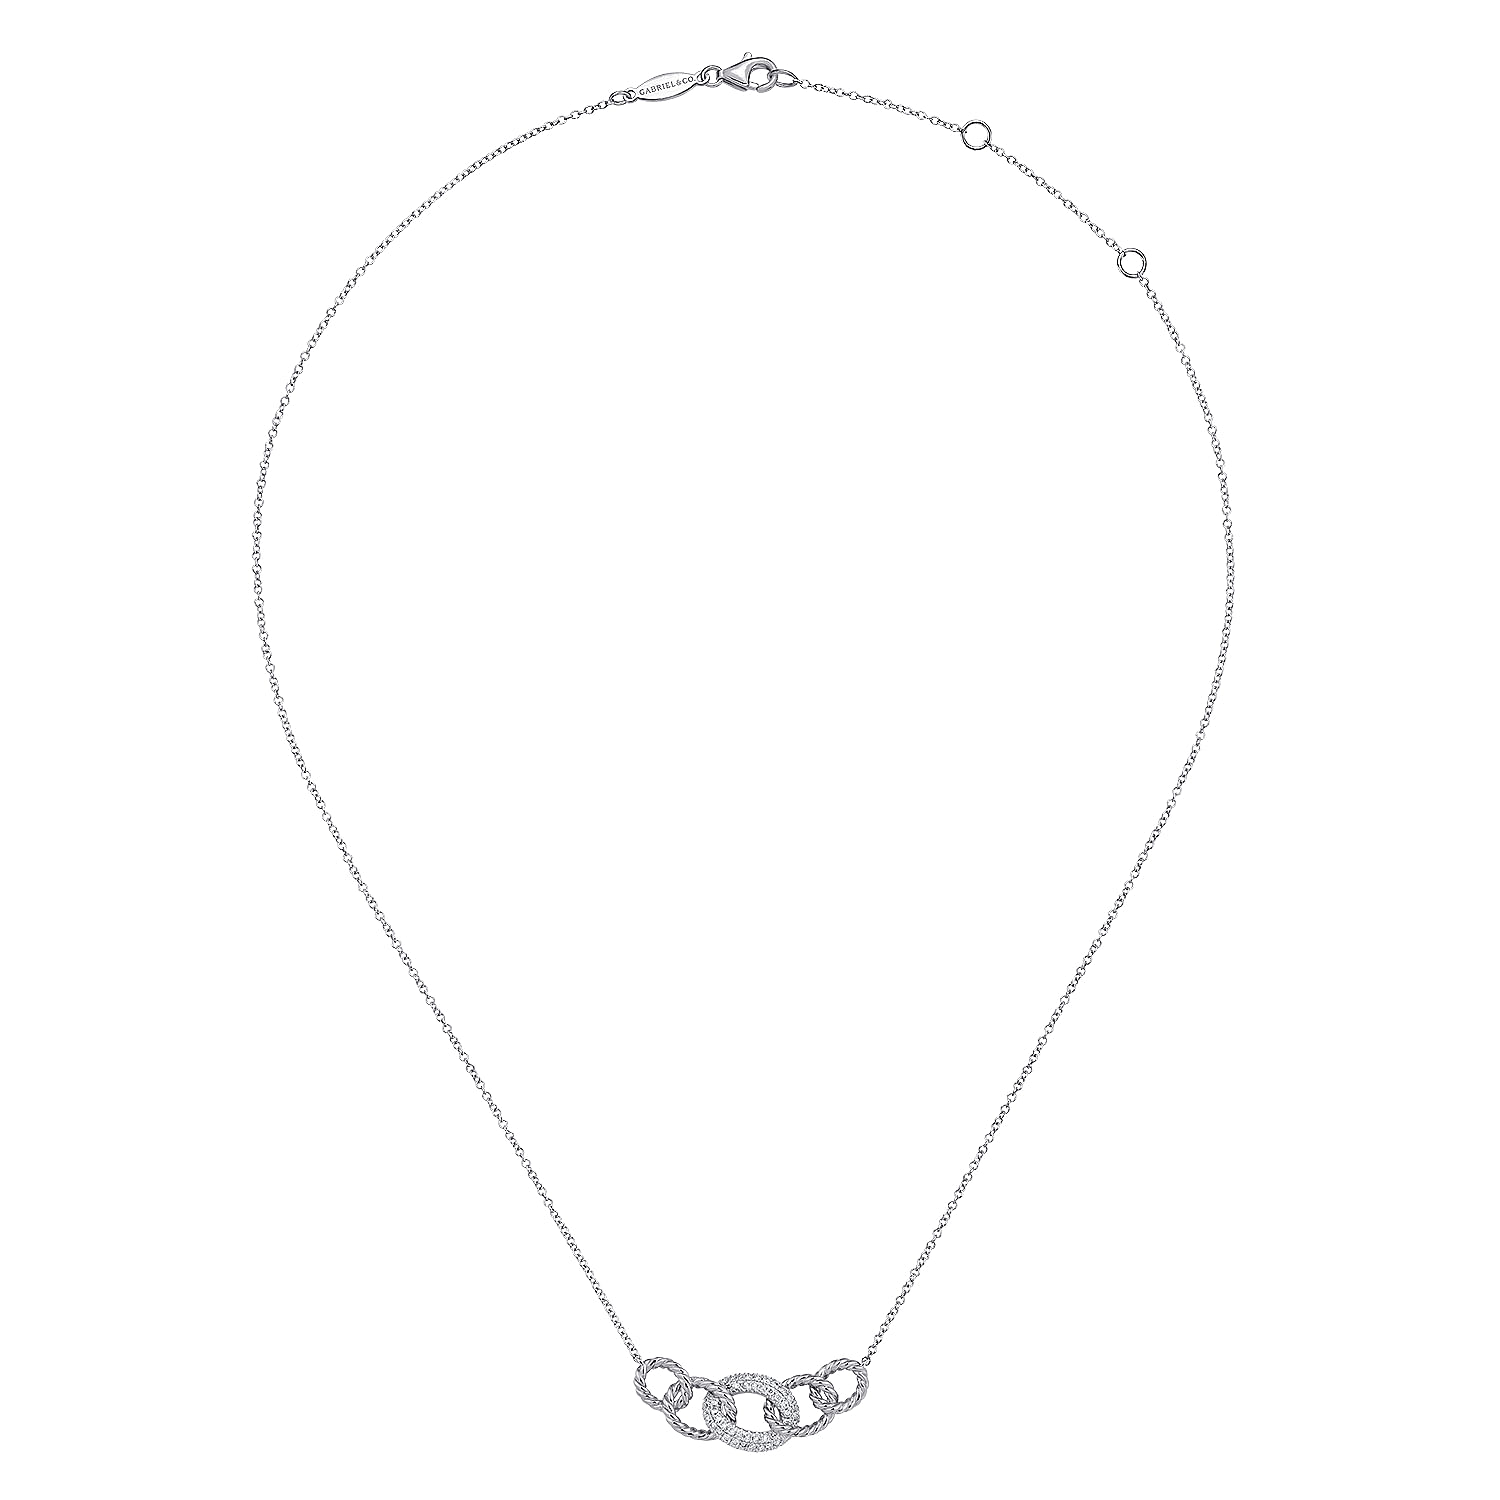 14K White Gold Twisted Rope Link Necklace with Pavé Diamond Link Station